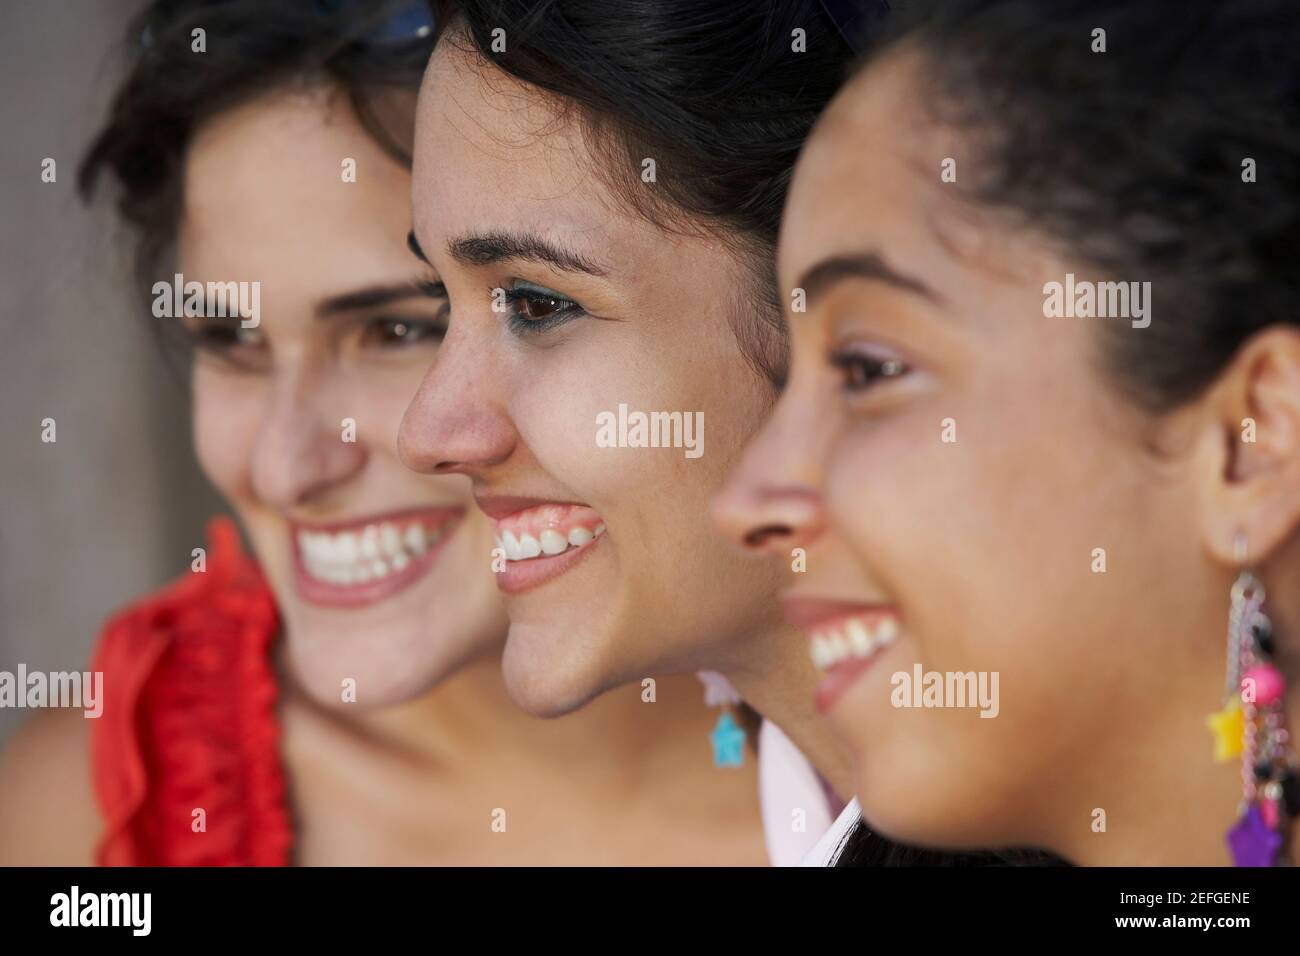 Close-up of three young women smiling Stock Photo